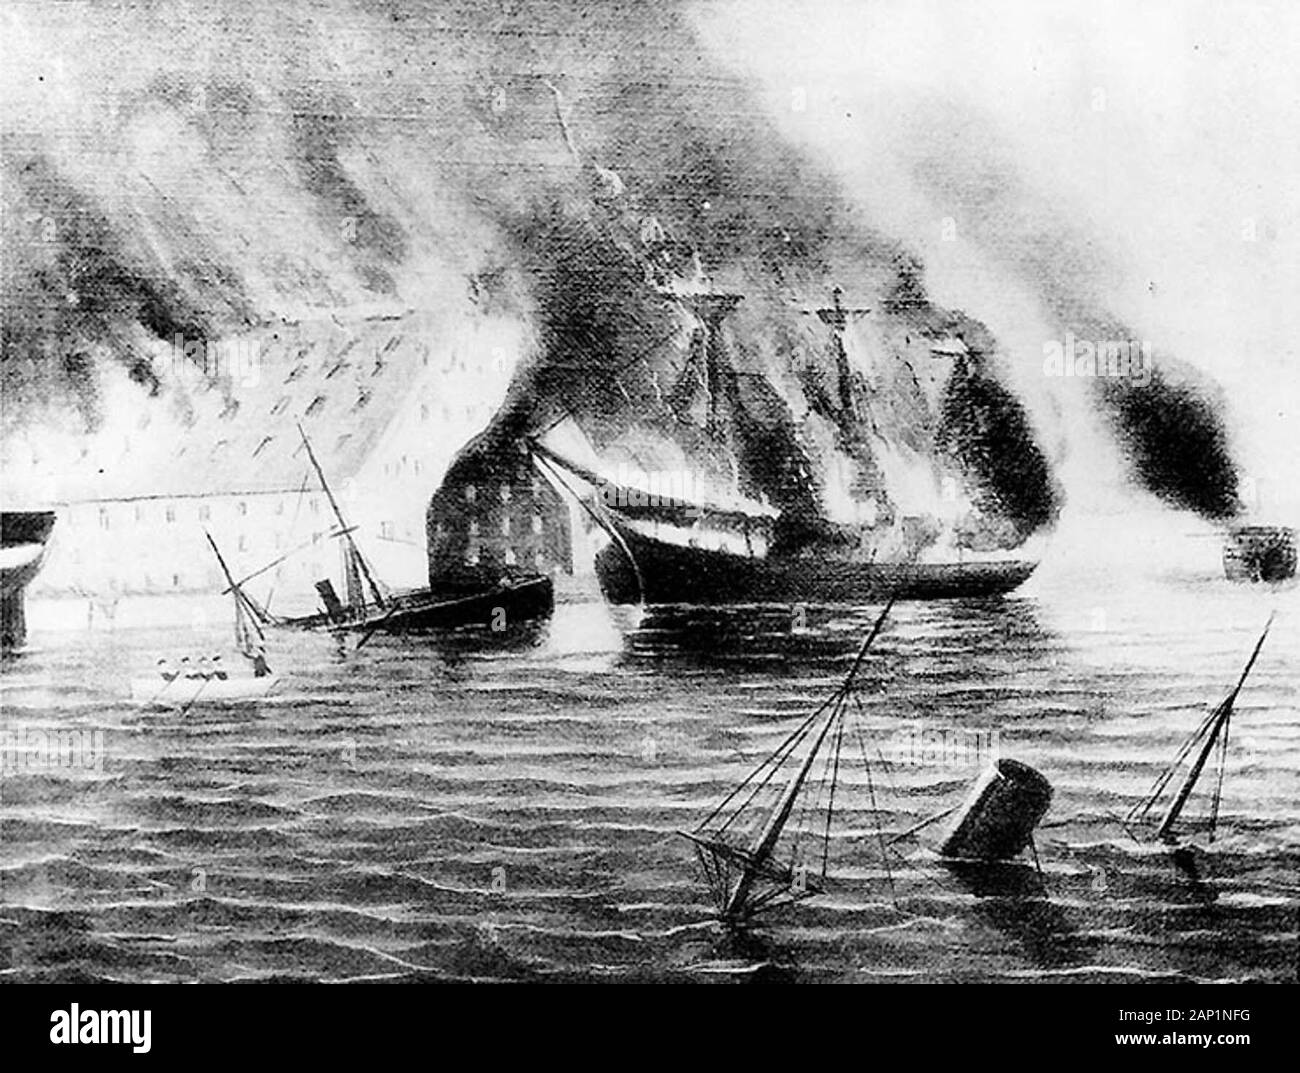 USS Merrimack aflame during the burning of the Norfolk Navy Yard, 20 April 1861 Stock Photo